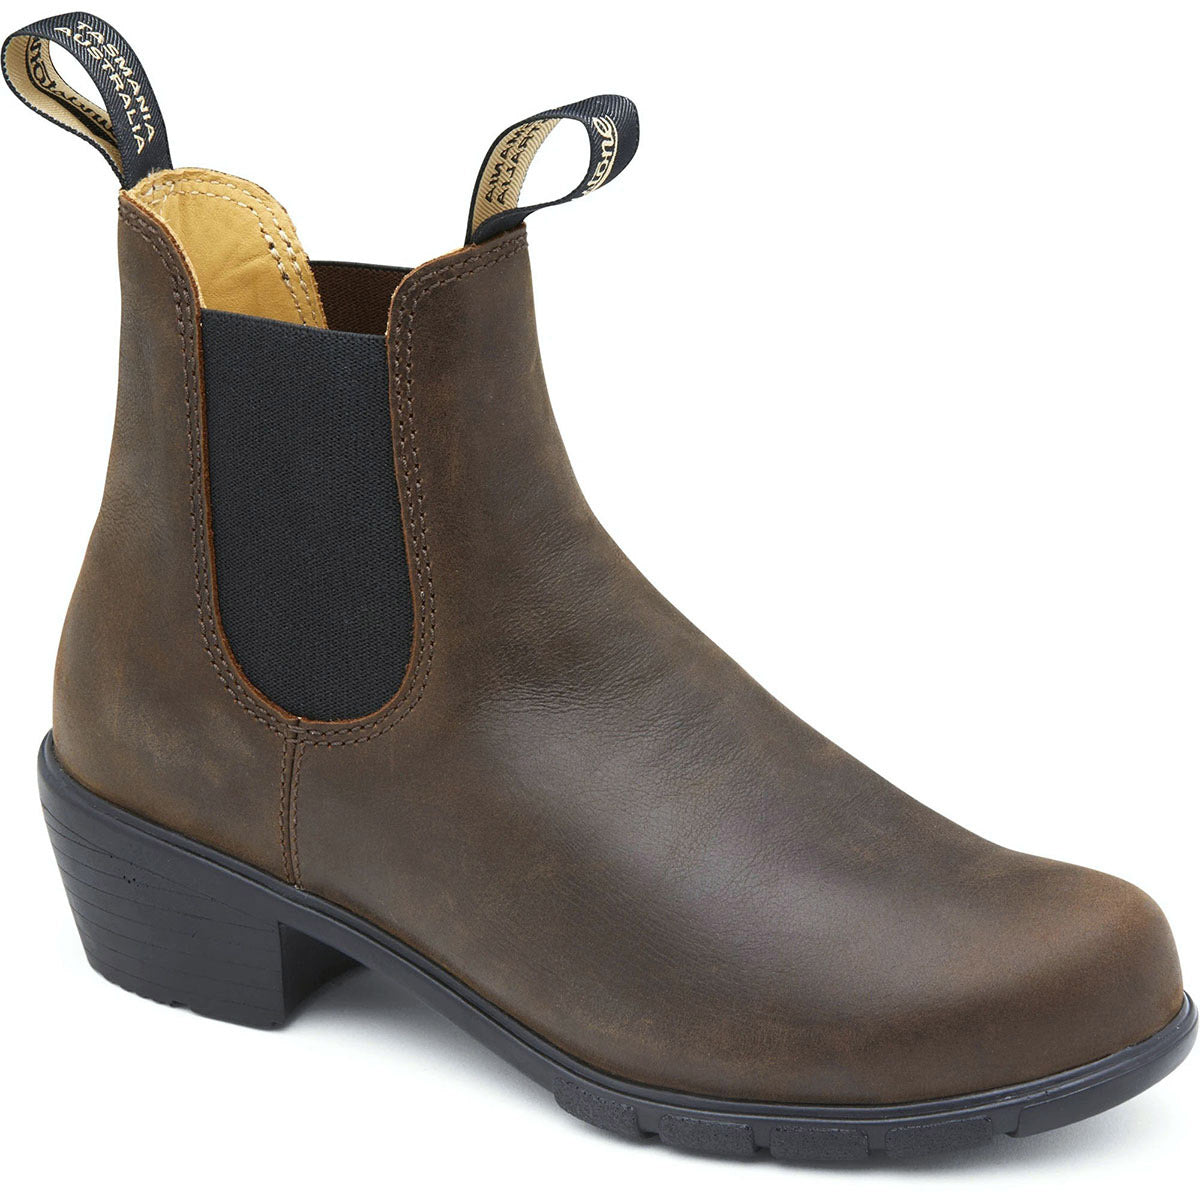 A brown leather ankle boot with a thick sole, black elastic side panels, and pull tabs on the front and back. The BLUNDSTONE 1673 HEEL ANTIQUE BROWN - WOMENS ankle boots by Blundstone are crafted from water-resistant leather, perfect for any weather.